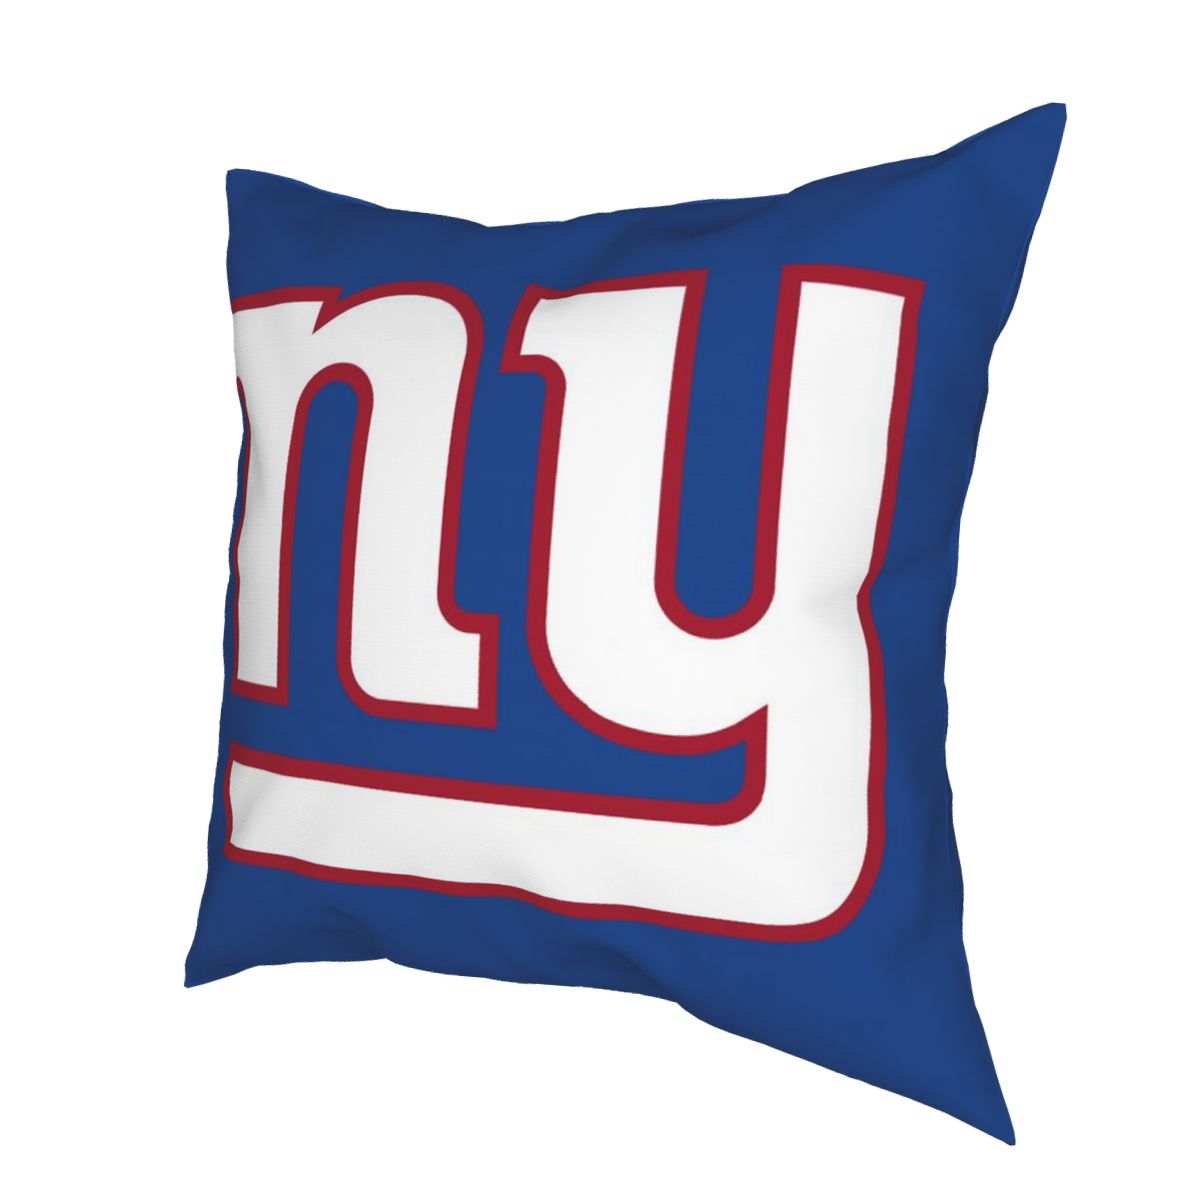 Custom Decorative Football Pillow Case New York Giants Royal Pillowcase Personalized Throw Pillow Covers